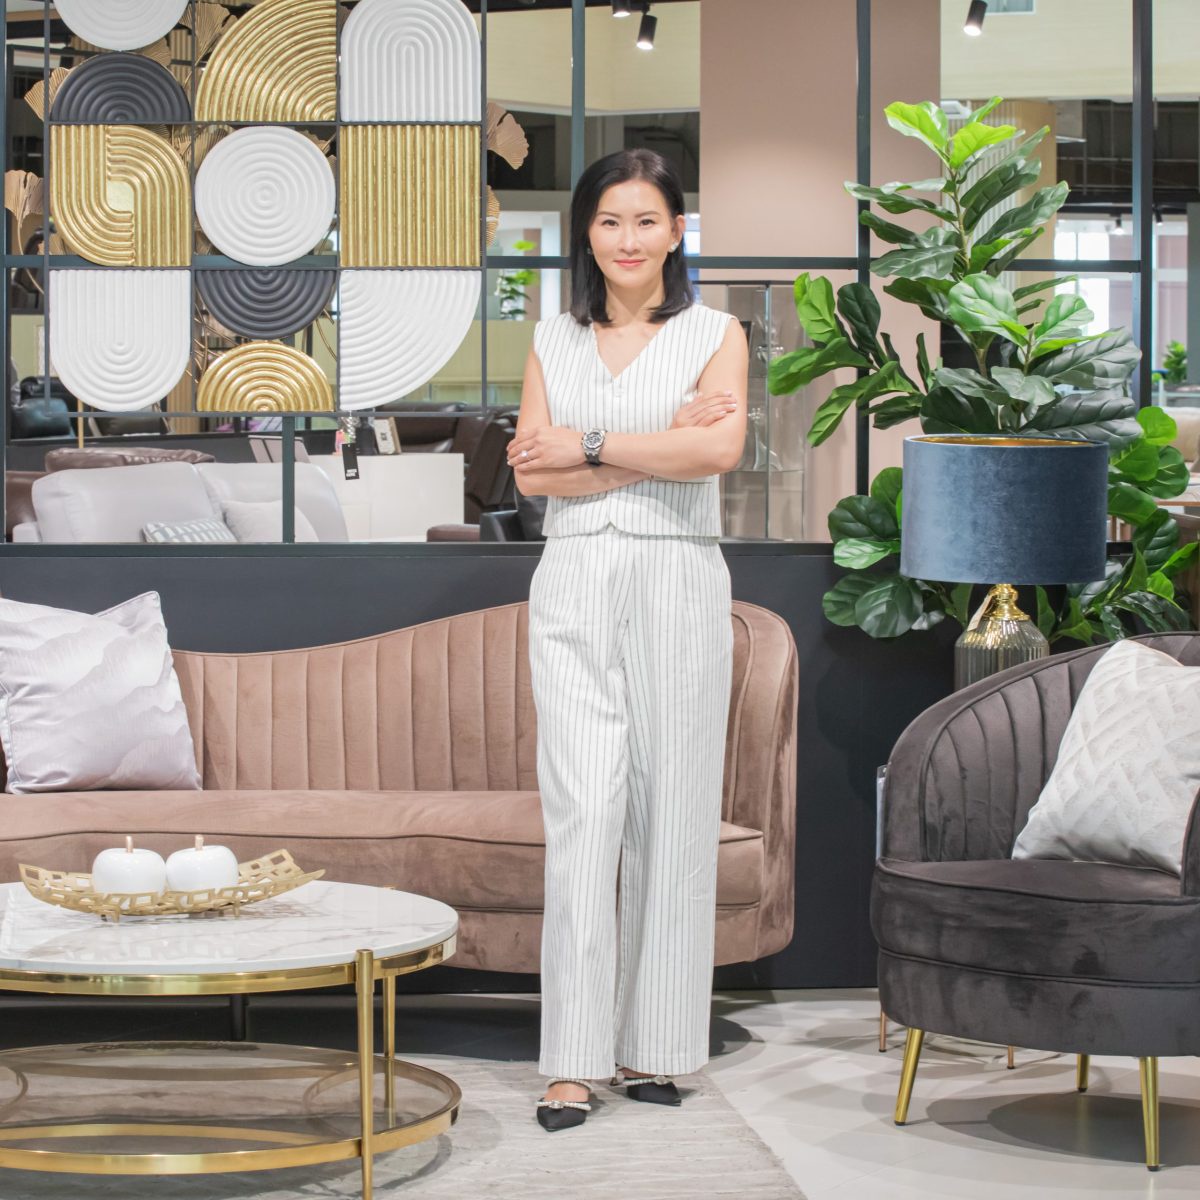 Index Living Mall undertakes major revamp of 'Phuket Branch' Aim to be No. 1 in furniture home decoration - Largest and best in